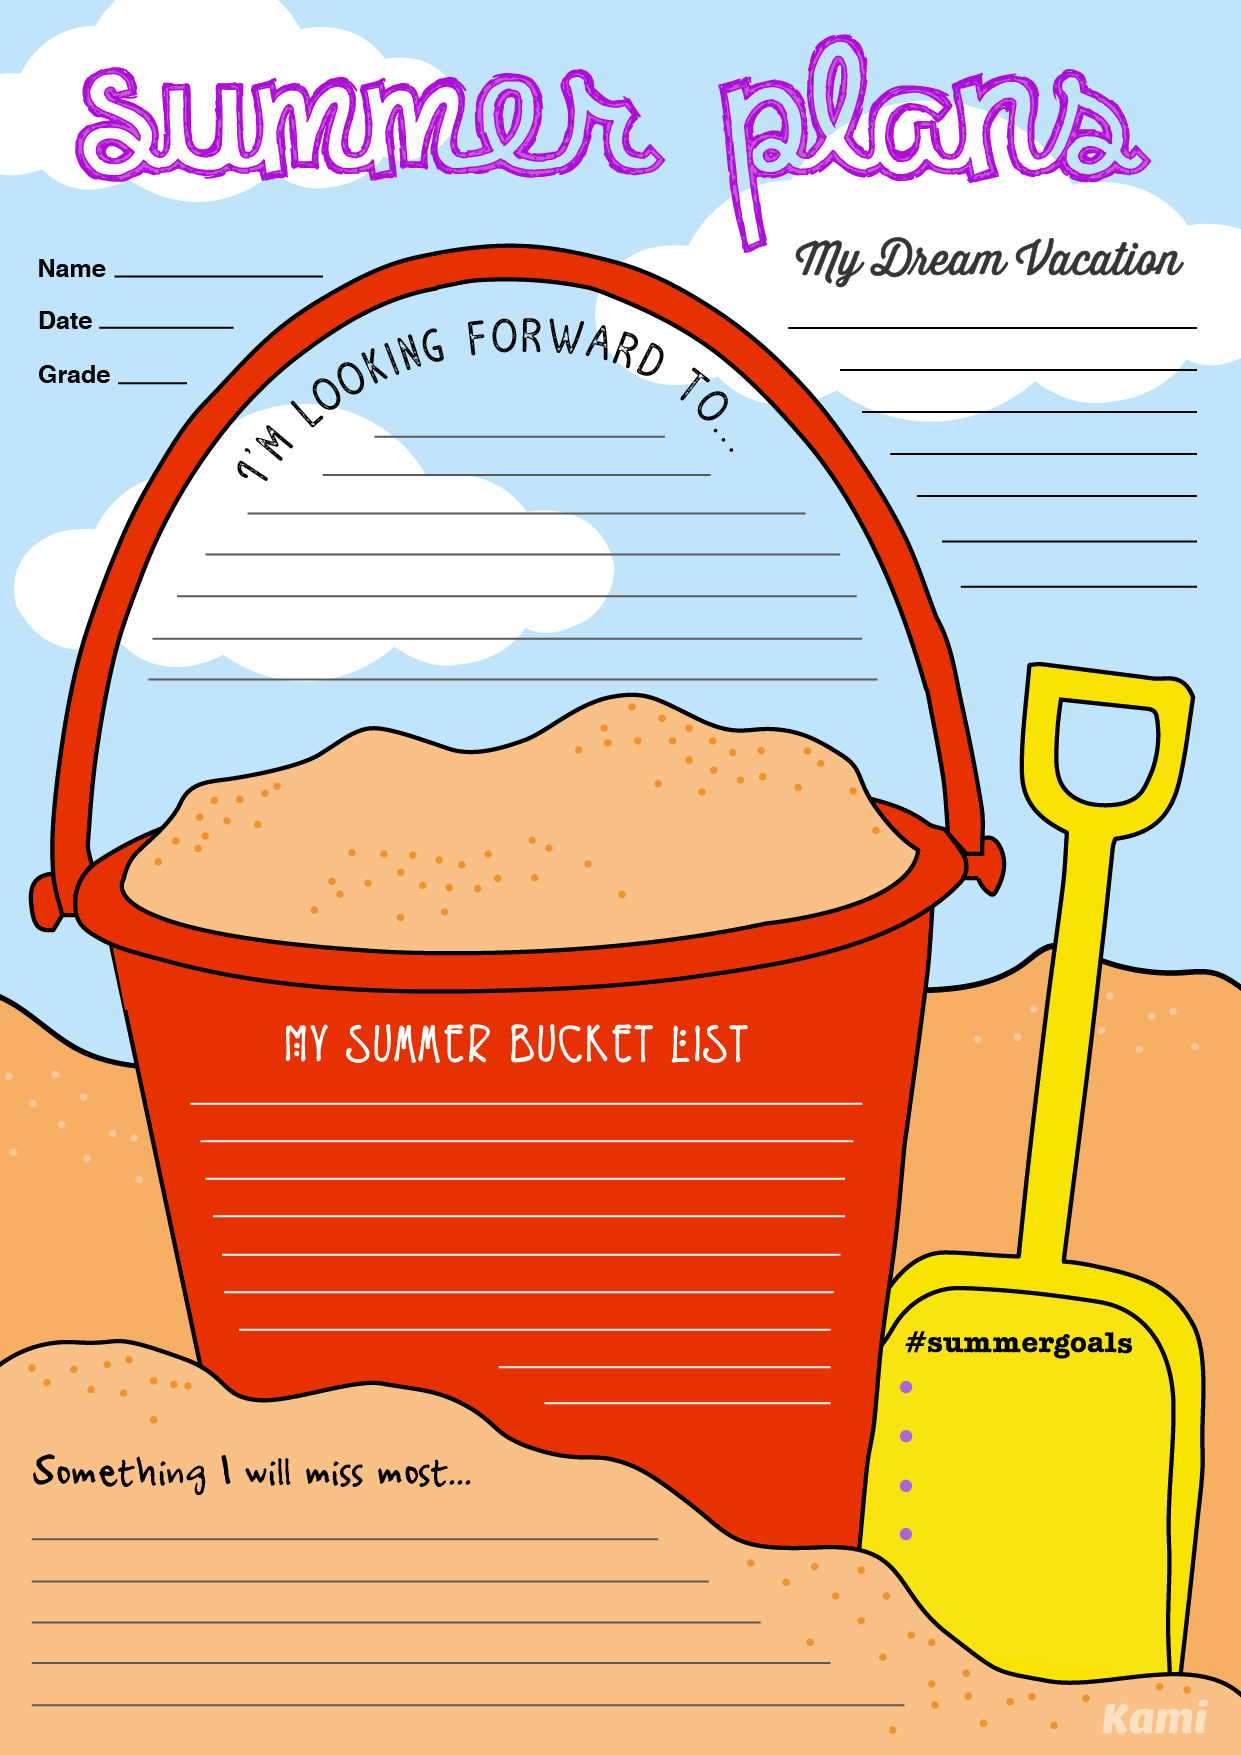 Graphic of a bucket on a beach with places to write summer plans